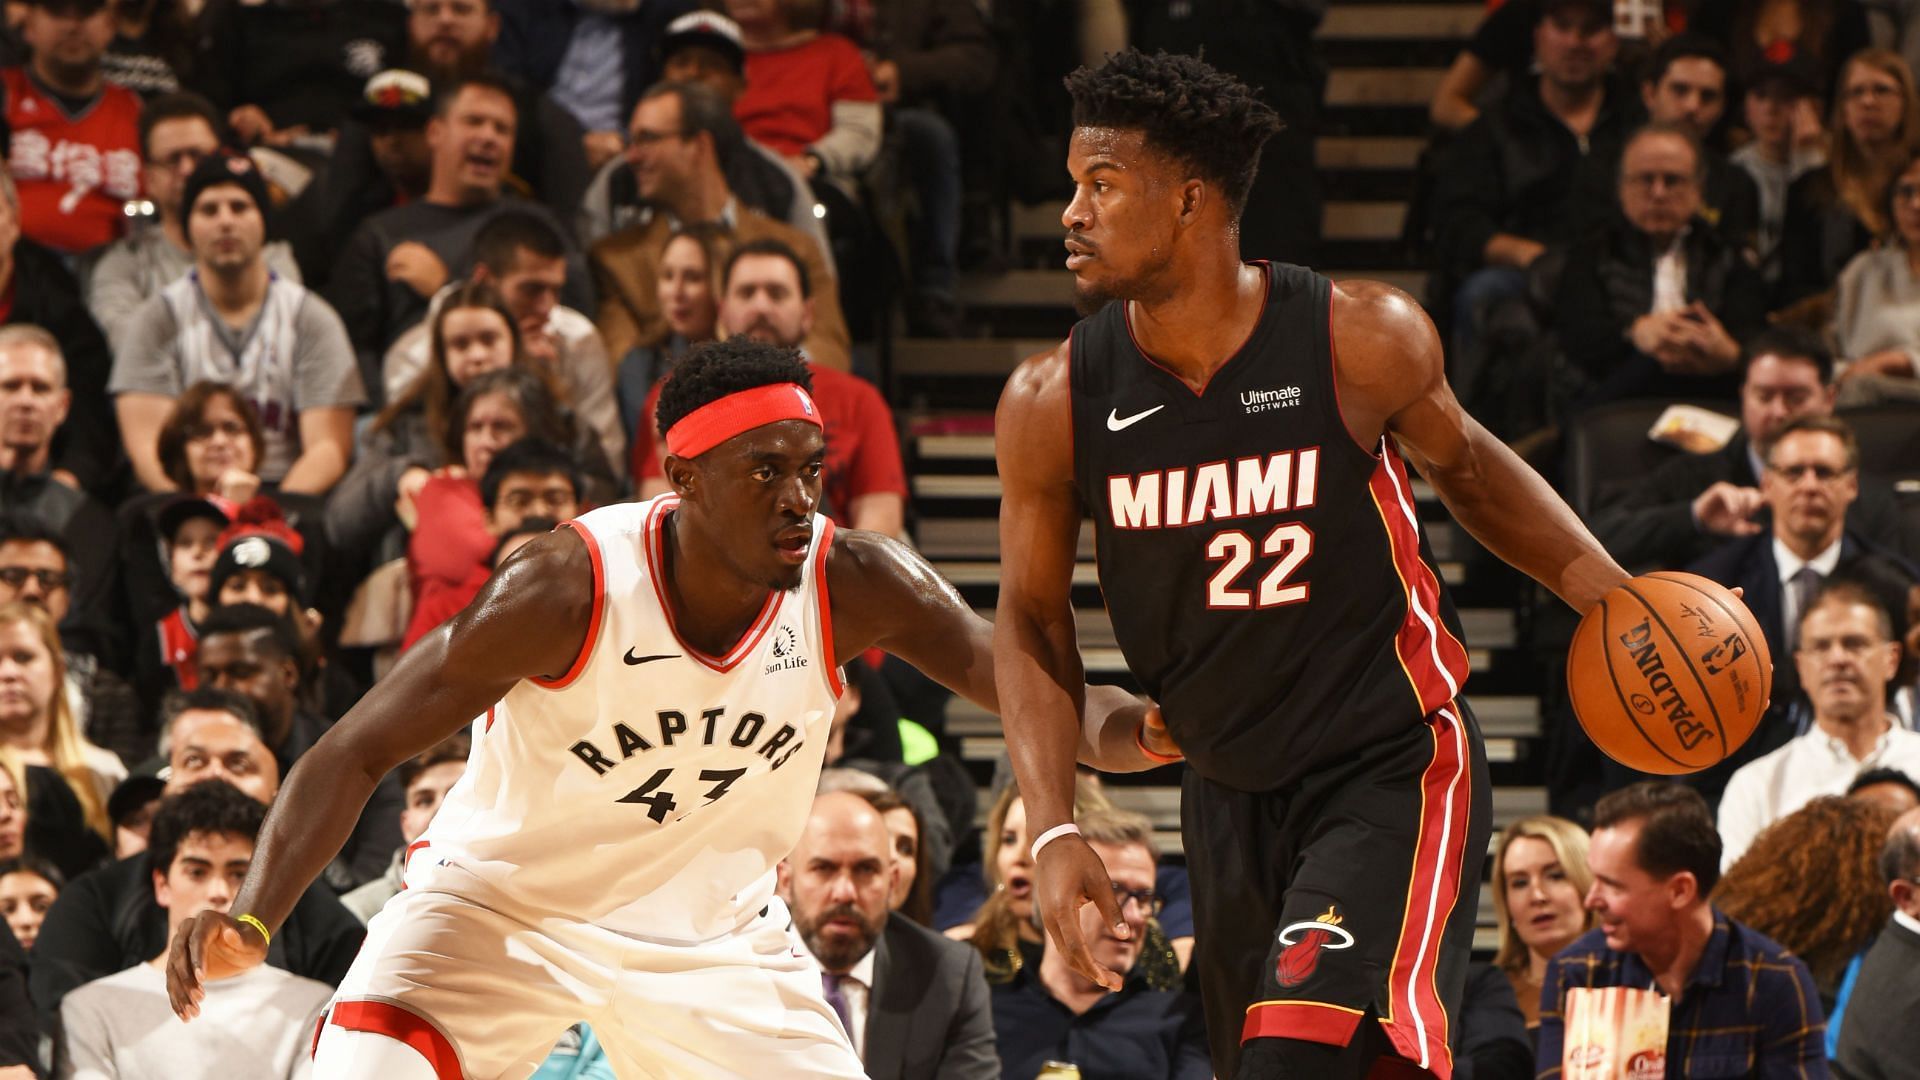 The Toronto Raptors and Miami Heat will meet for the first time since the big trade involving Kyle Lowry happened in the offseason. [Photo: NBA.com Canada]